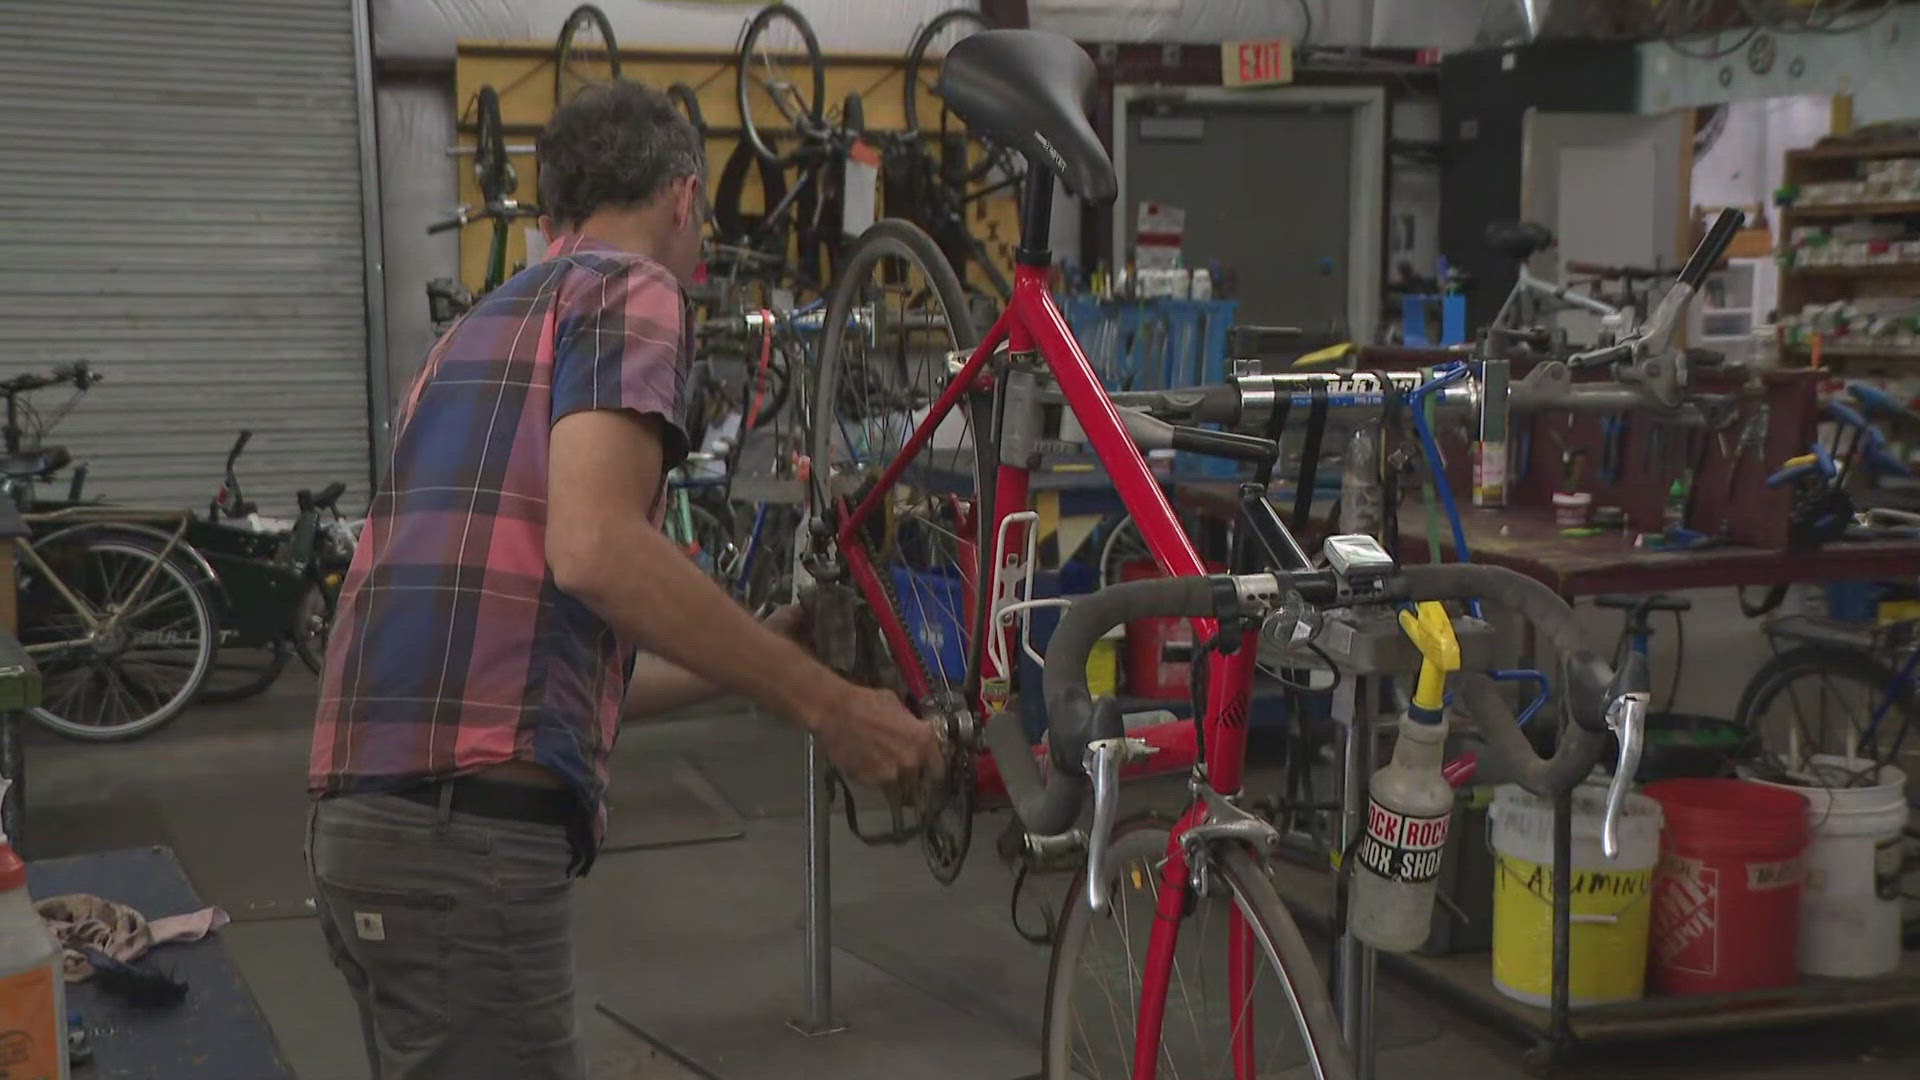 An Austin nonprofit that fixes up bikes and gives them away to people in need was robbed earlier this month.